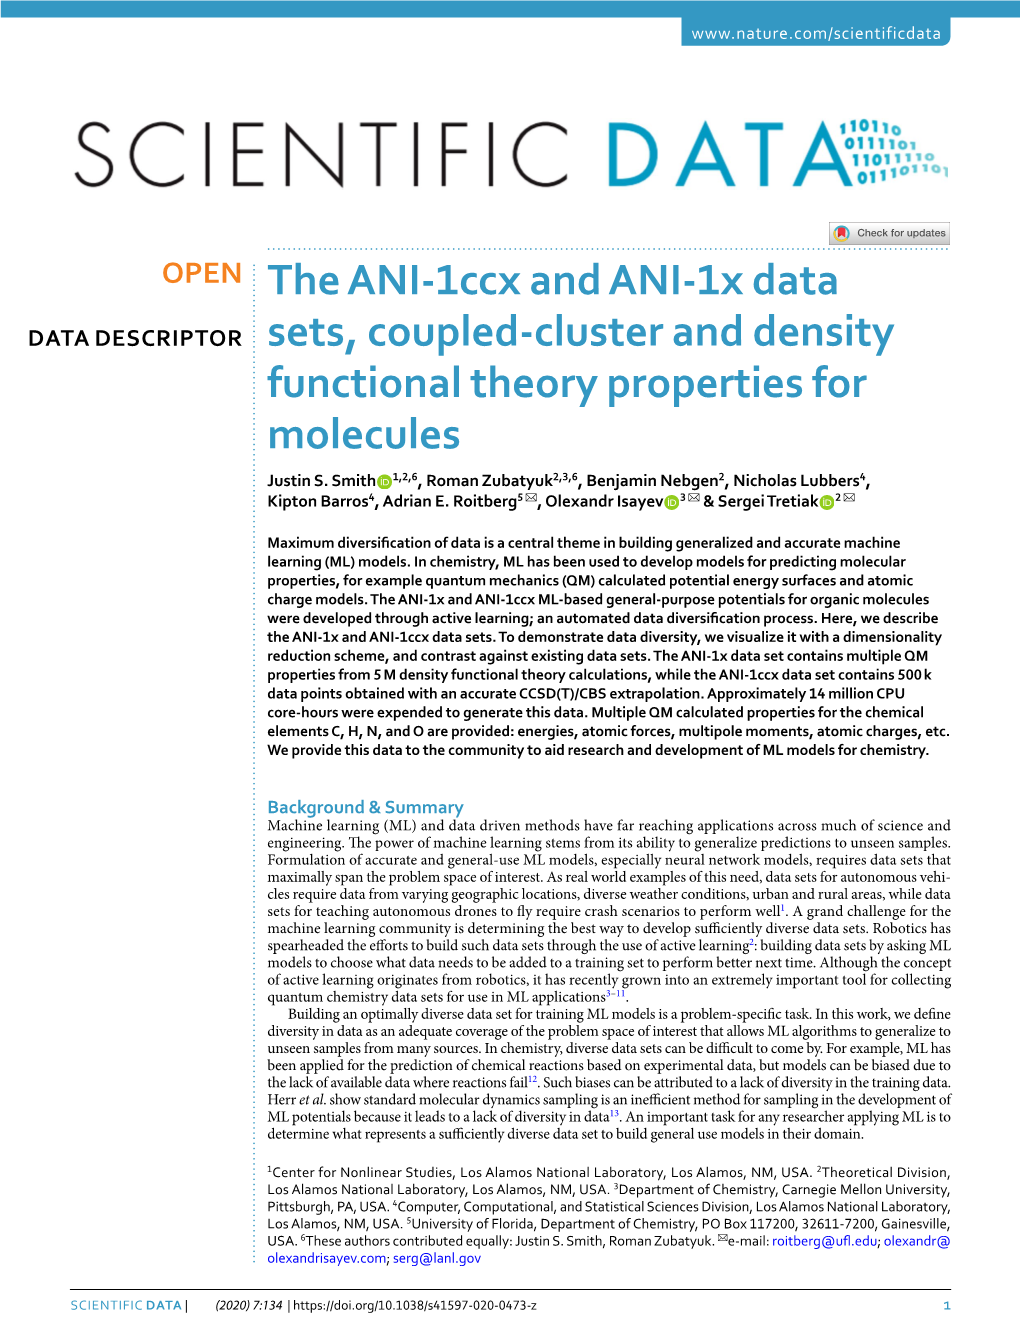 The ANI-1Ccx and ANI-1X Data Sets, Coupled-Cluster and Density